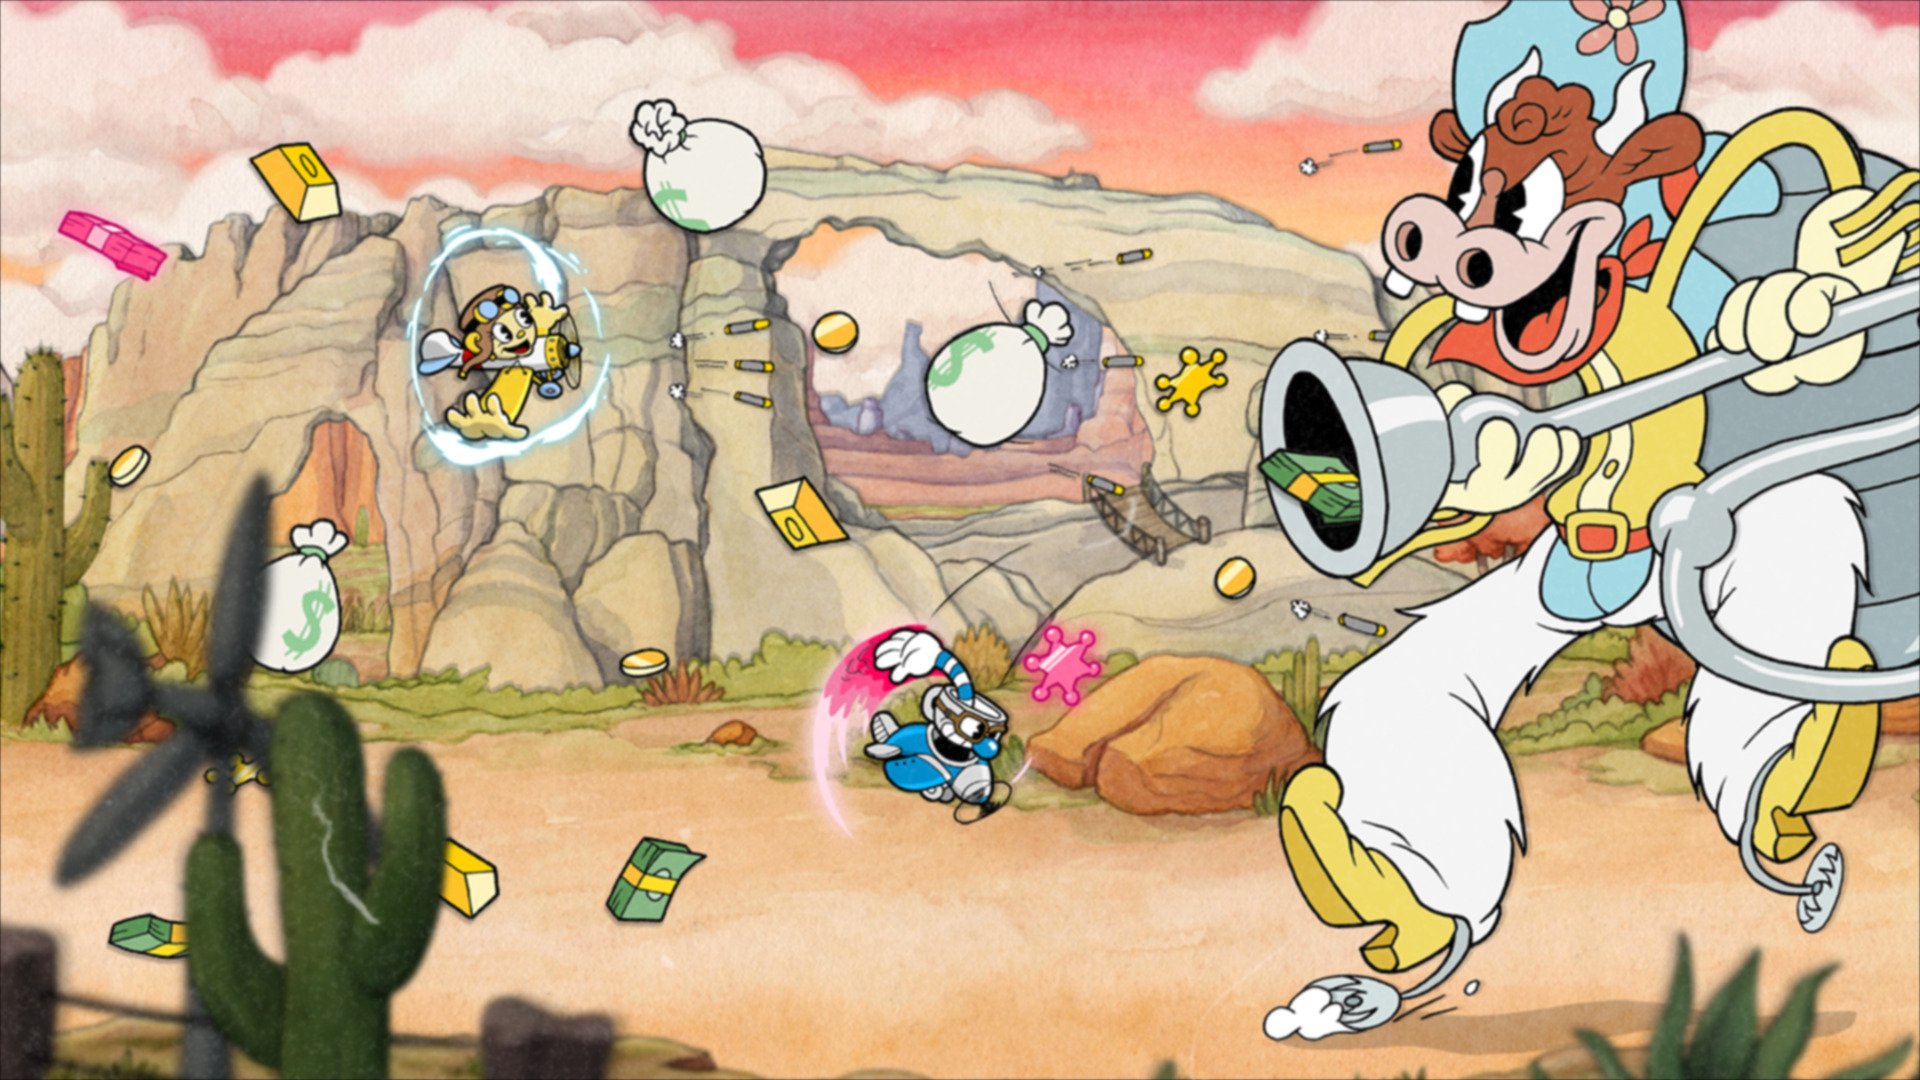 Cuphead physical edition announced for PS4, Xbox One, and Switch, includes  DLC 'The Delicious Last Course' - Gematsu